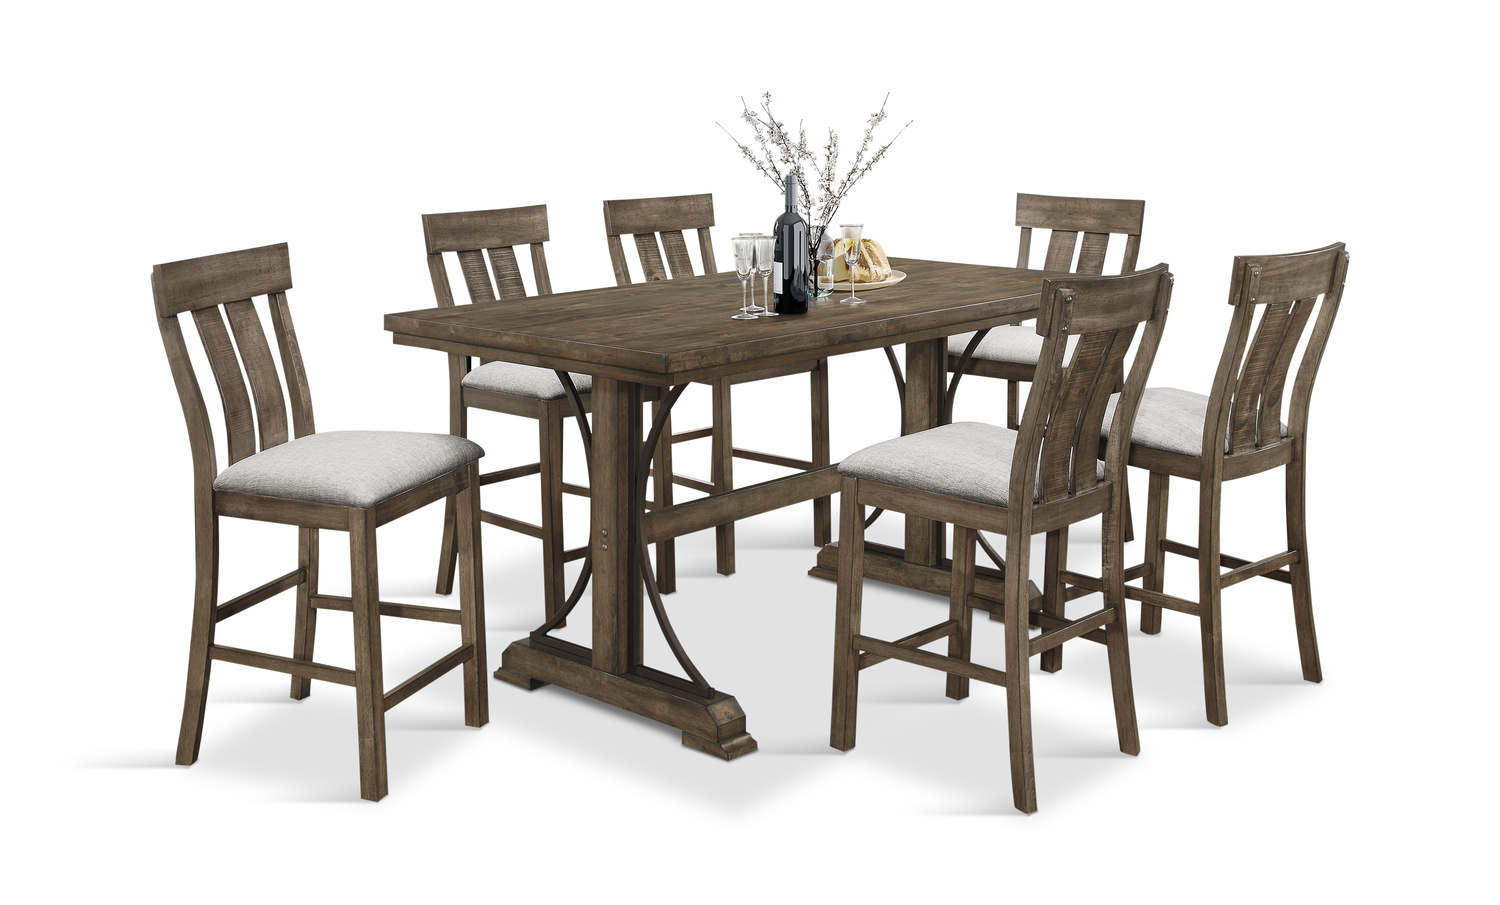 Adams Counter Height Dining Table With 6 Stools Dock86